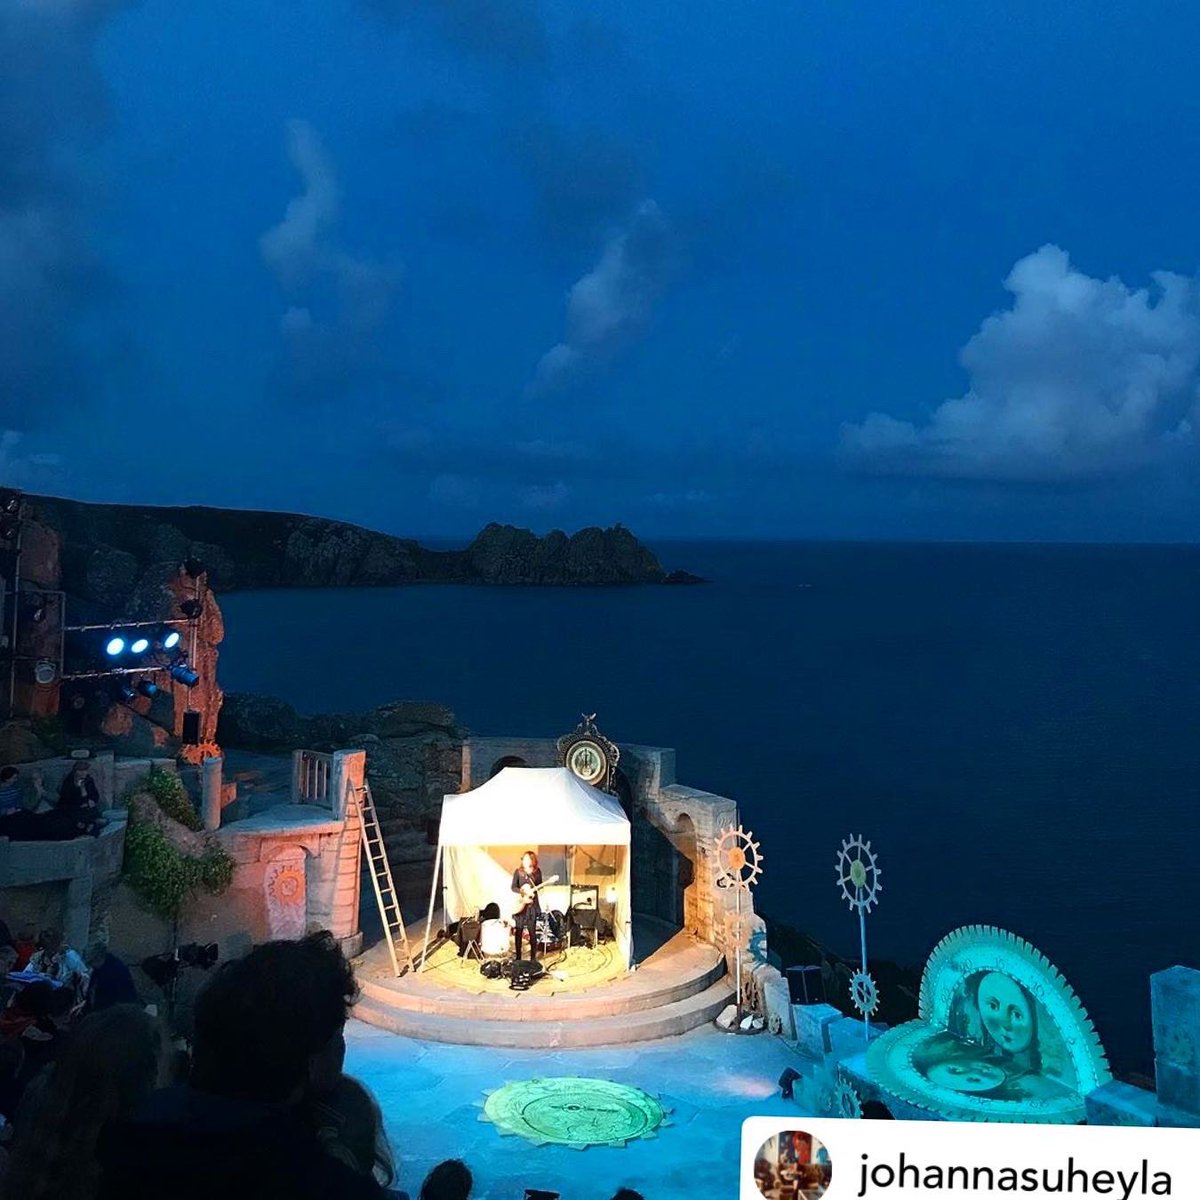 Massive thanks to my wonderful fellow musician #JohannaHillebrand for these lovely pix from Friday night’s @minacktheatre gig! Looking forward to playing @CornwallFolk #Festival #Wadebridge tonight (Sun 27 Aug) — directly after which @cacophony_cottage & I will be heading ->